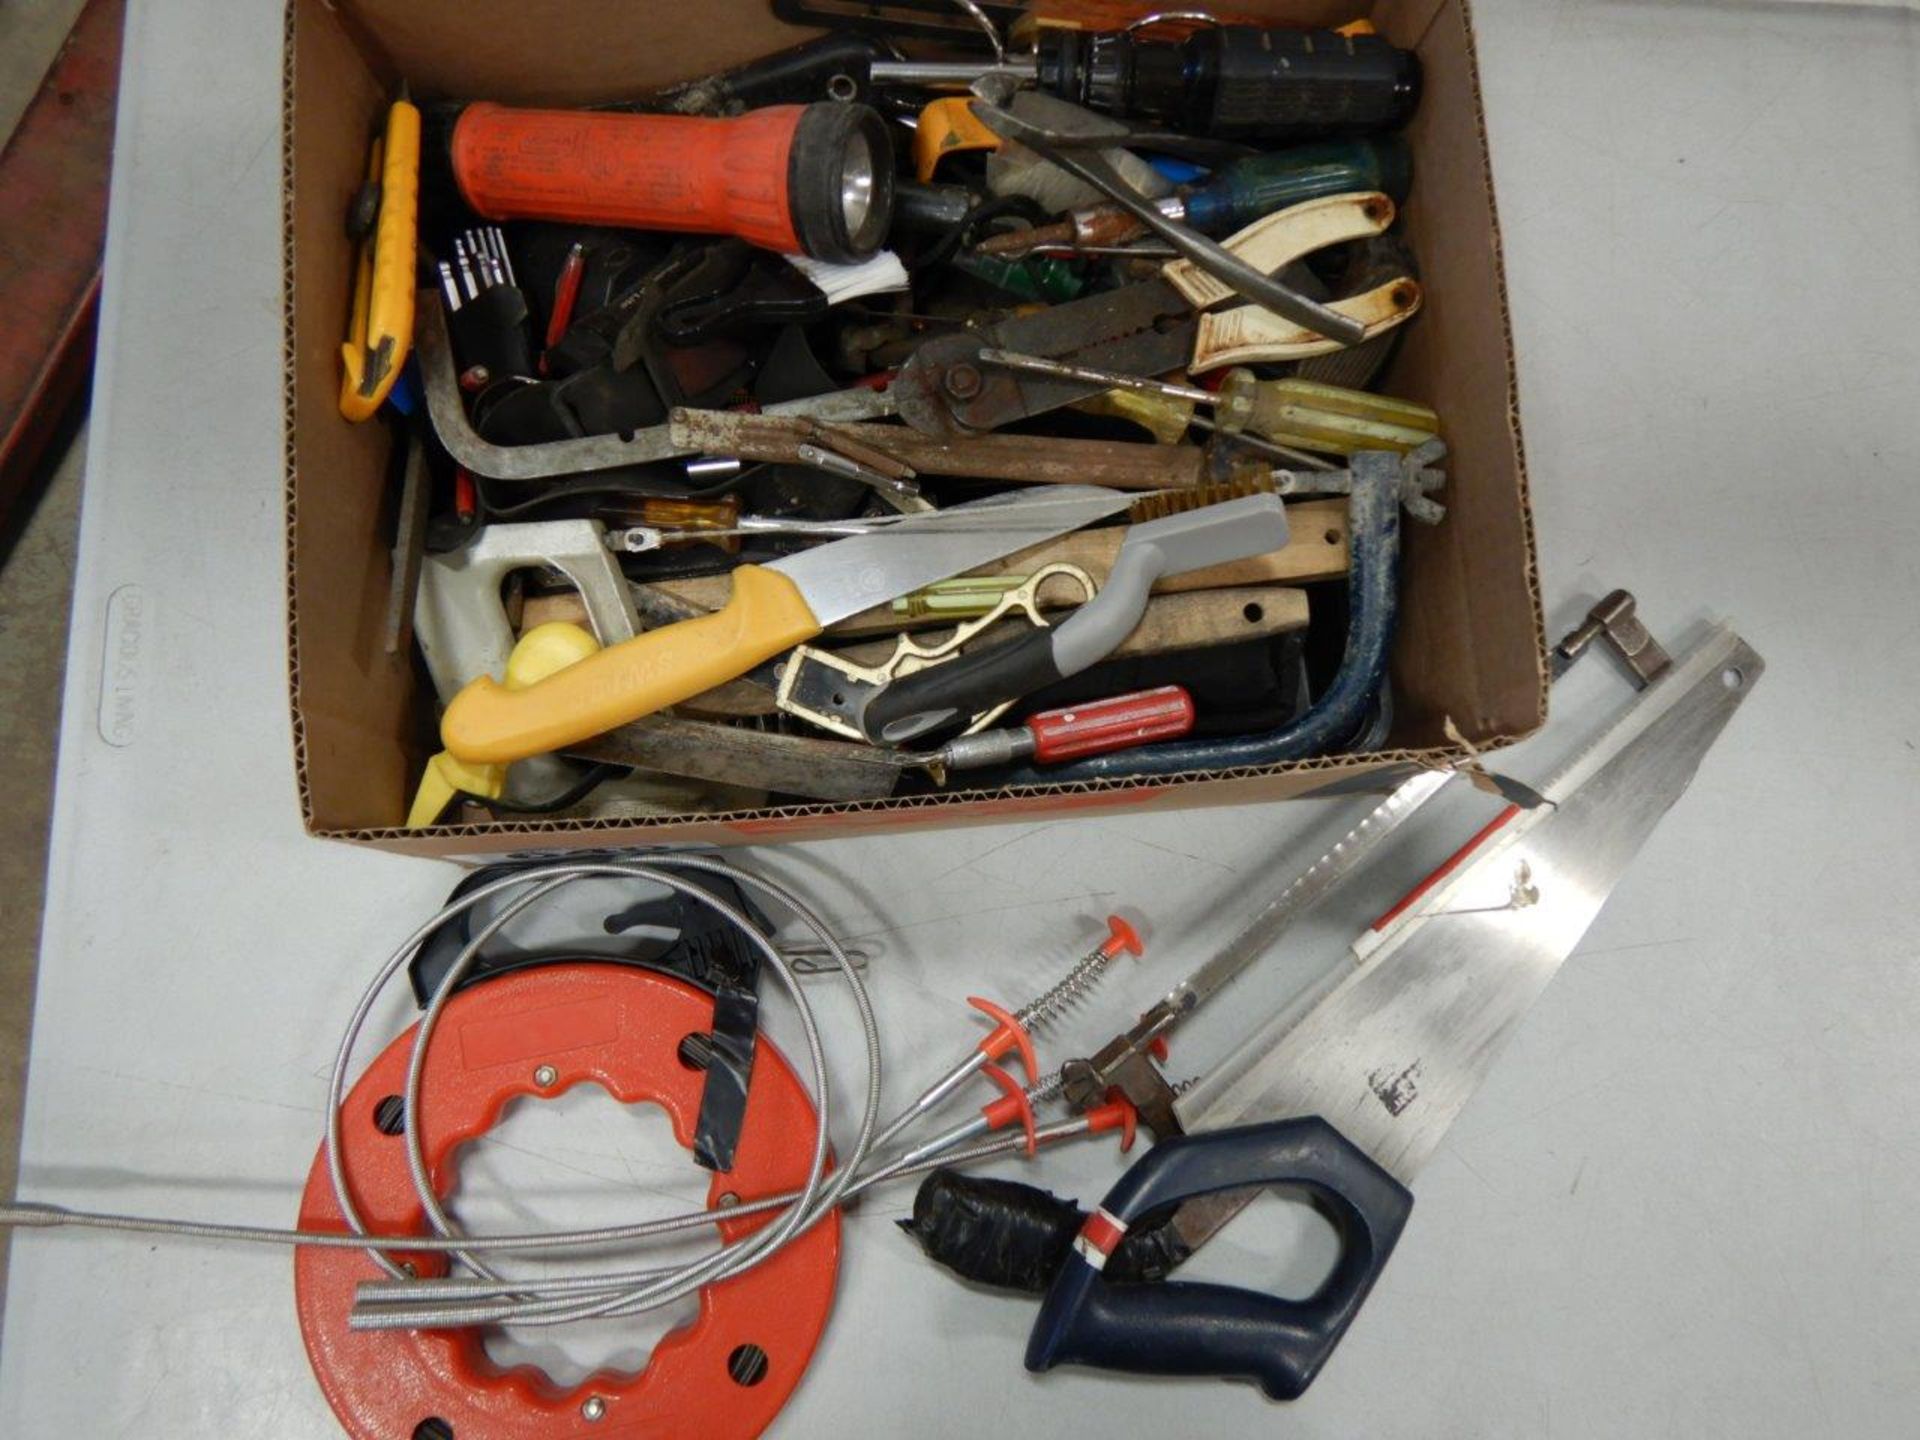 L/O ASSORTED HAND TOOLS, HAND SAWS, FISH TAPE, ETC. - Image 2 of 2